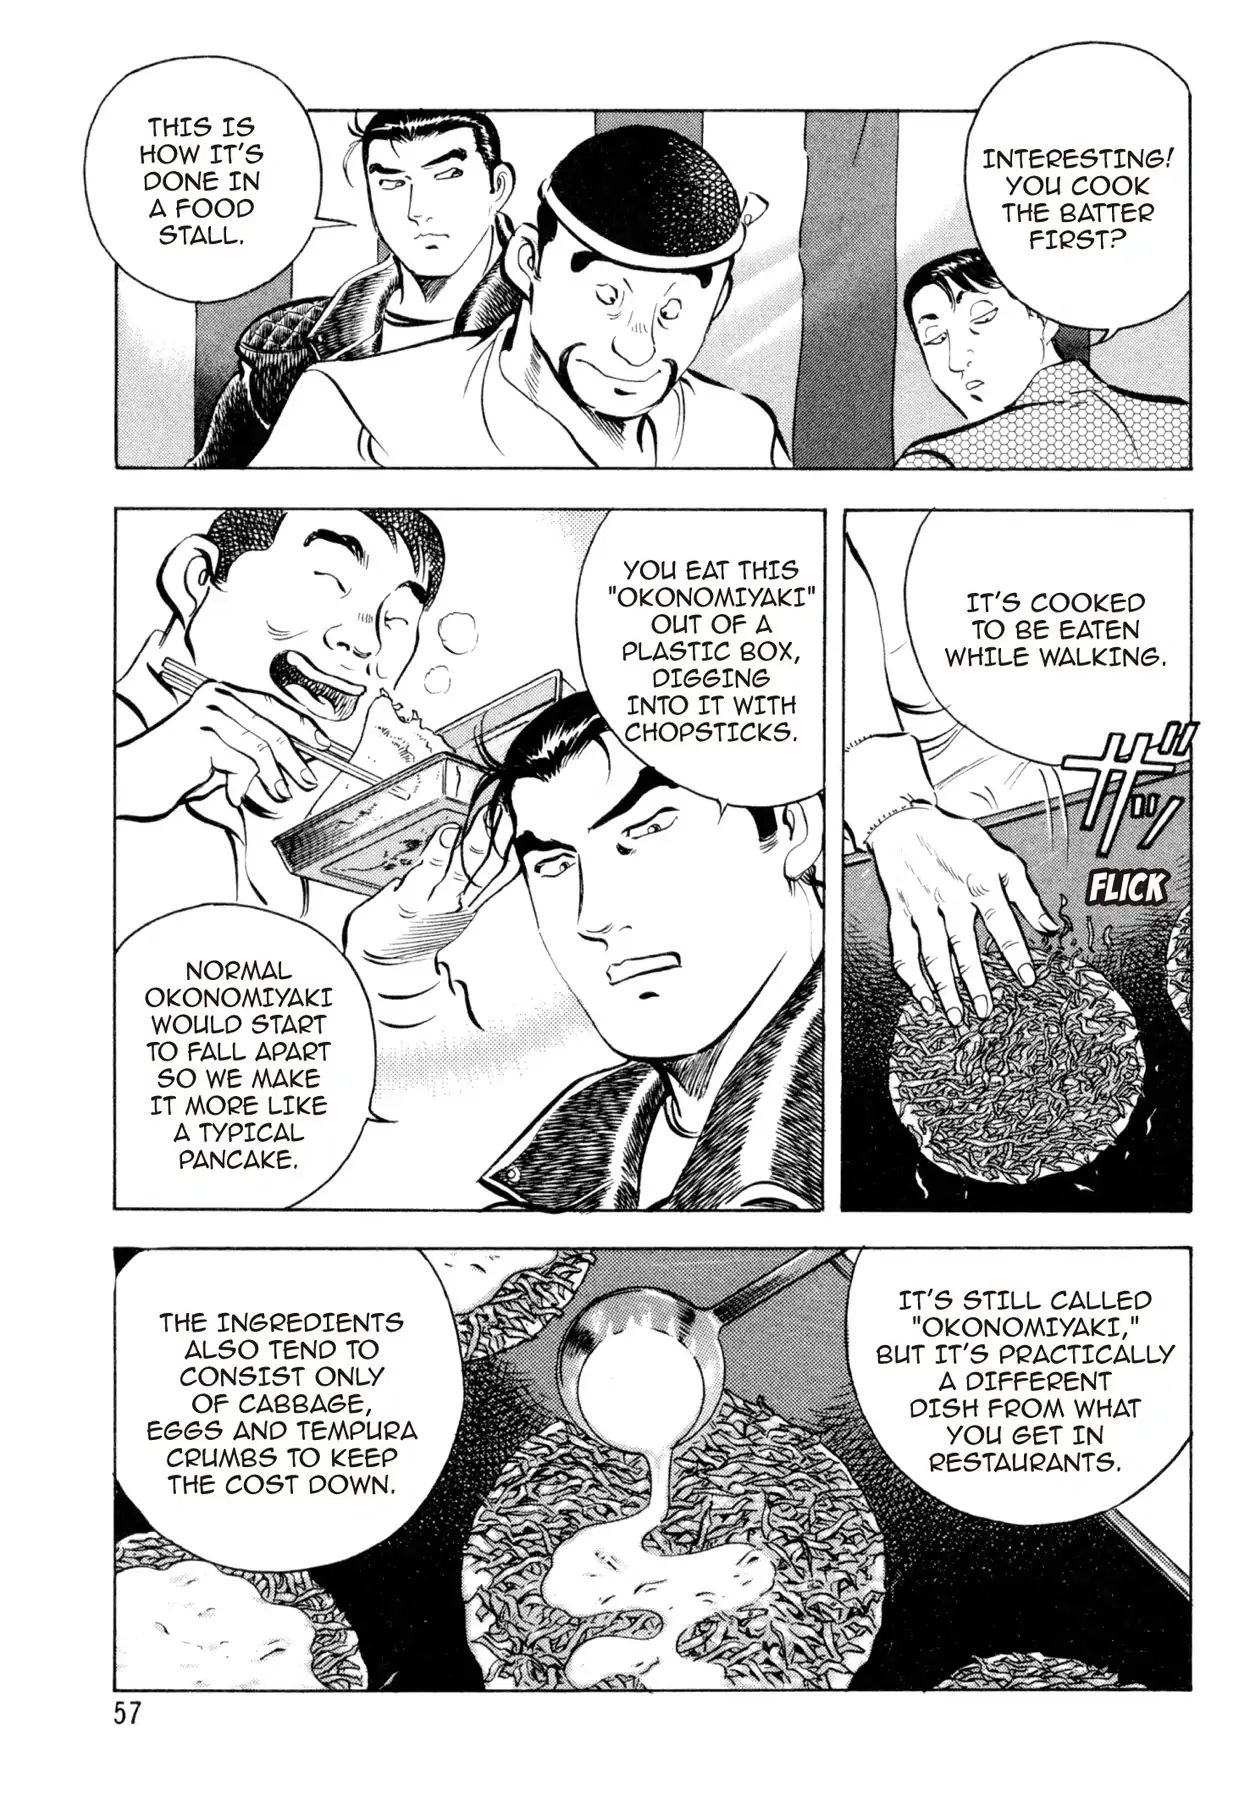 Shoku King VOL.7 CHAPTER 55: THE FLAVOR OF THE FAIR